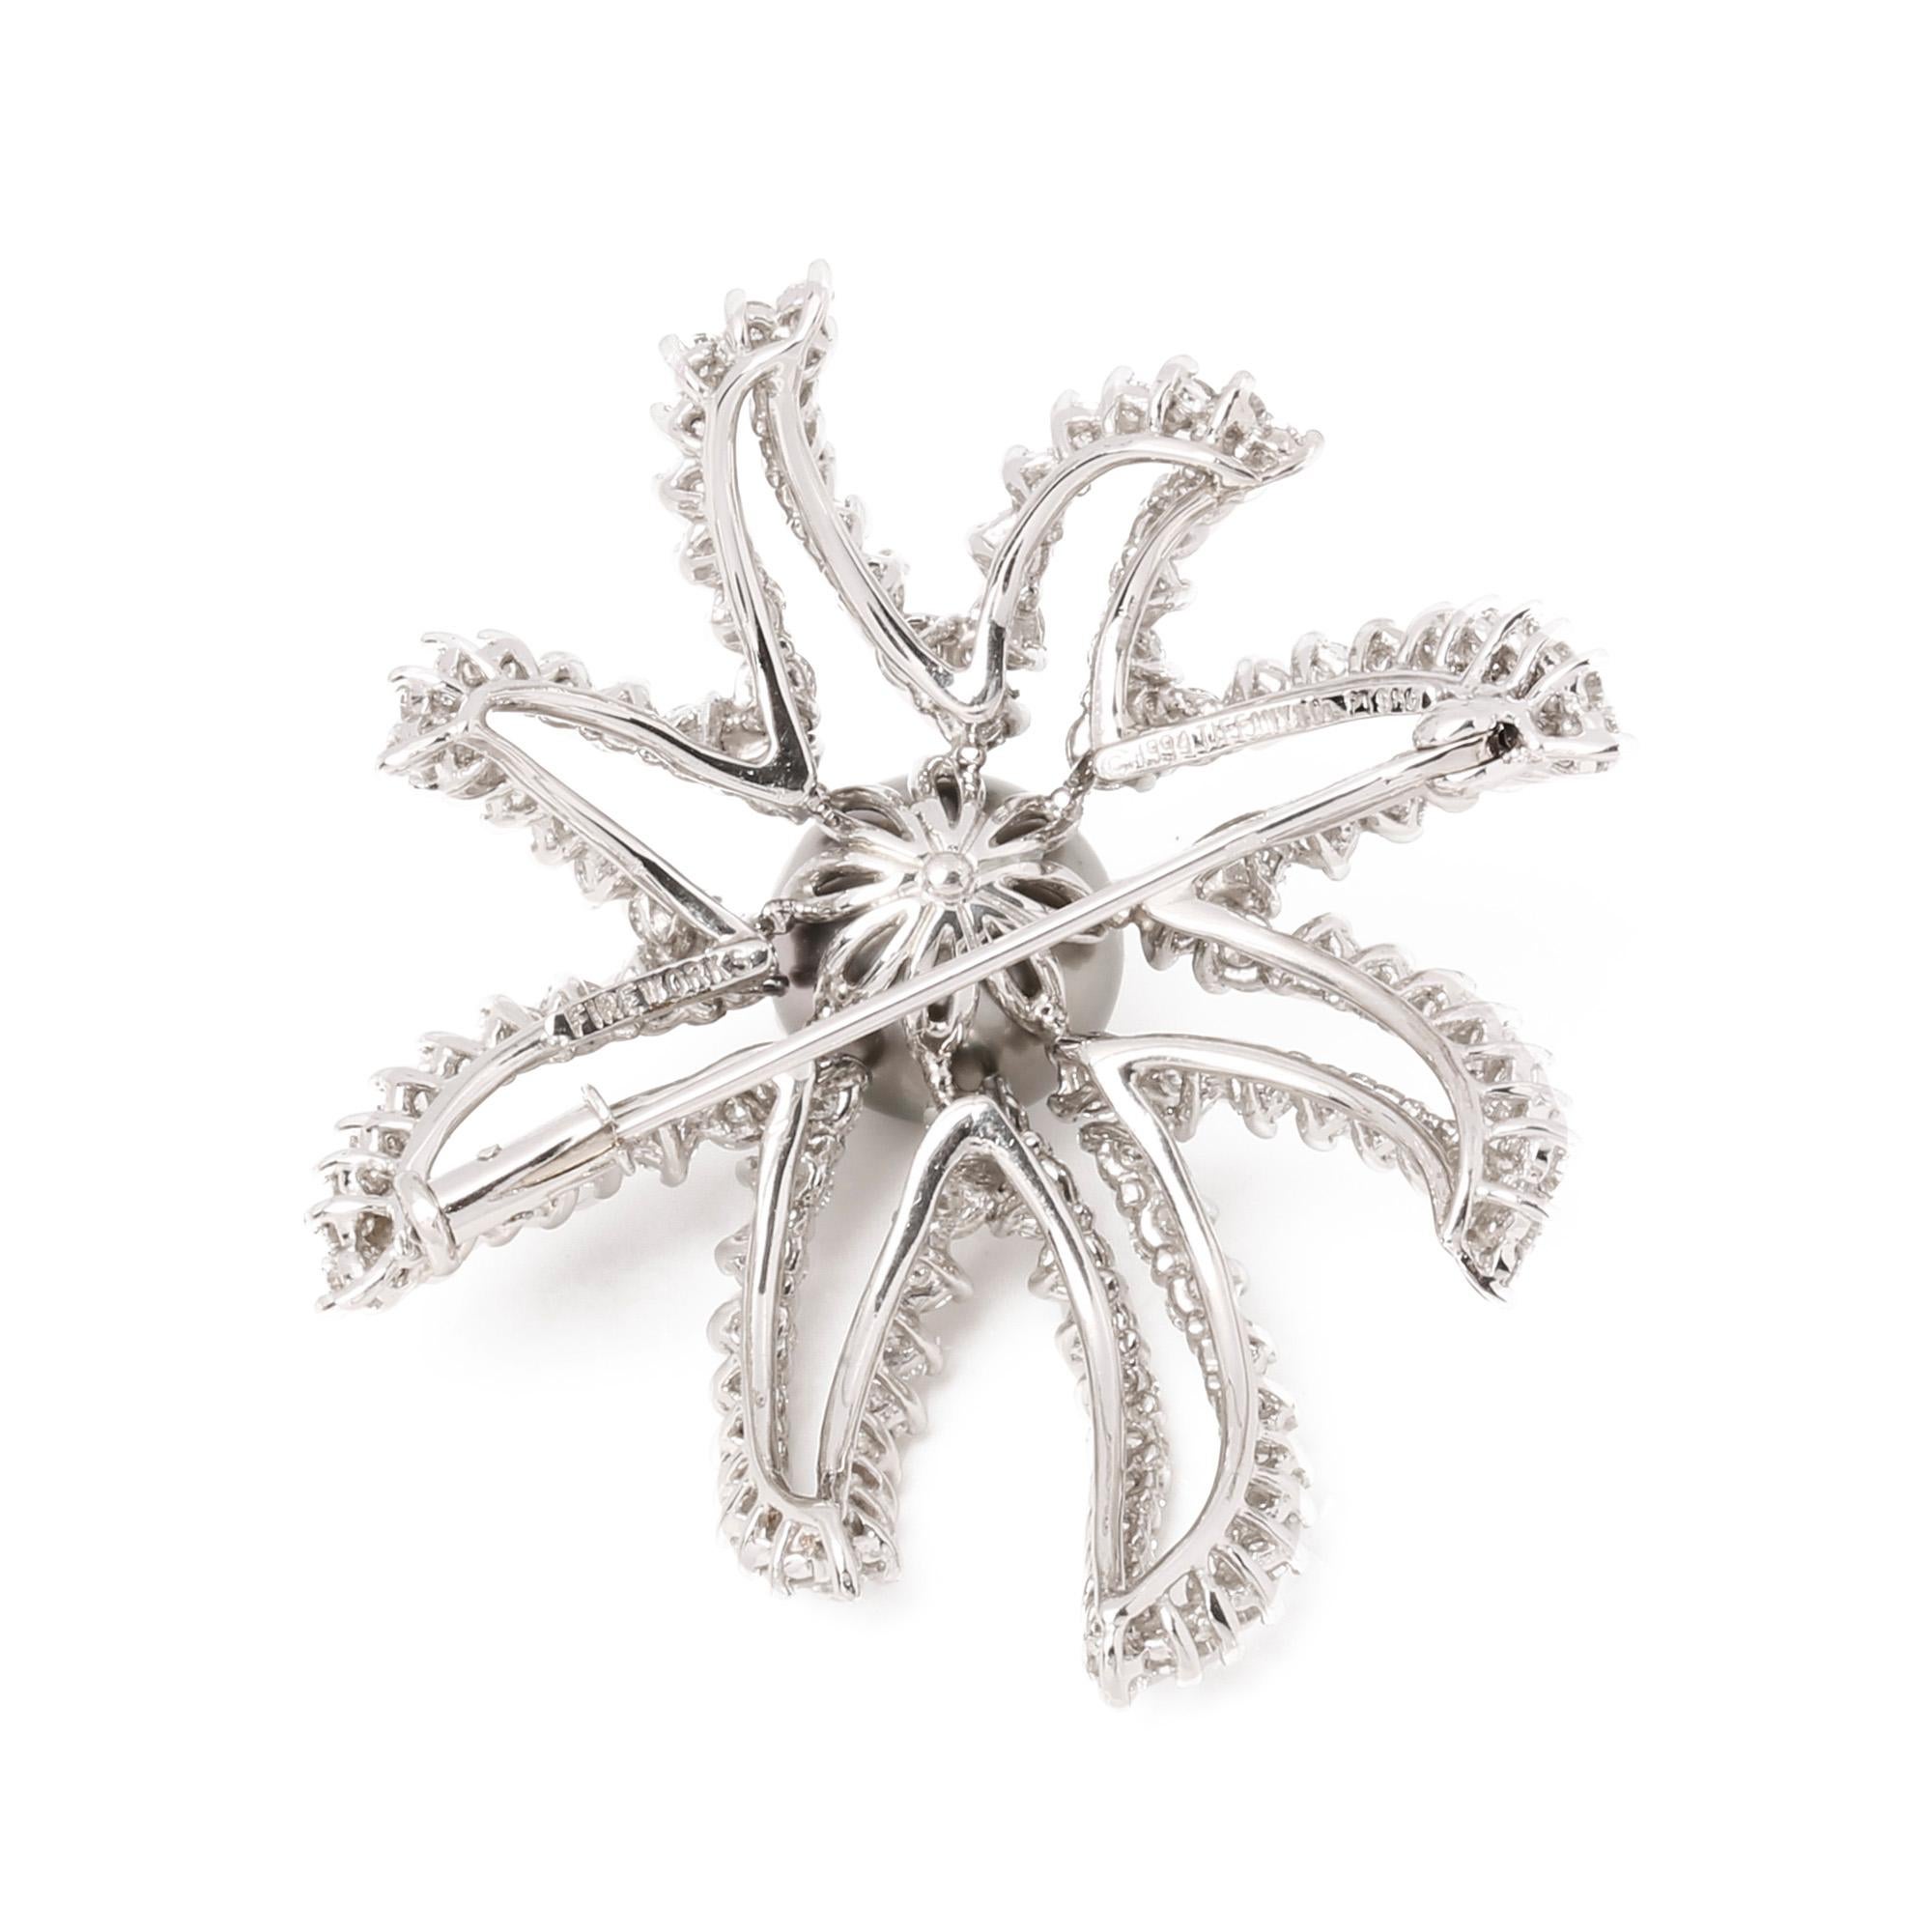 This 1994 Brooch by Tiffany & Co. features a pearl and diamond firework design, made in platinum and featuring round cut diamonds totalling 3.0-3.5 carats around a central pearl of 11mm. 